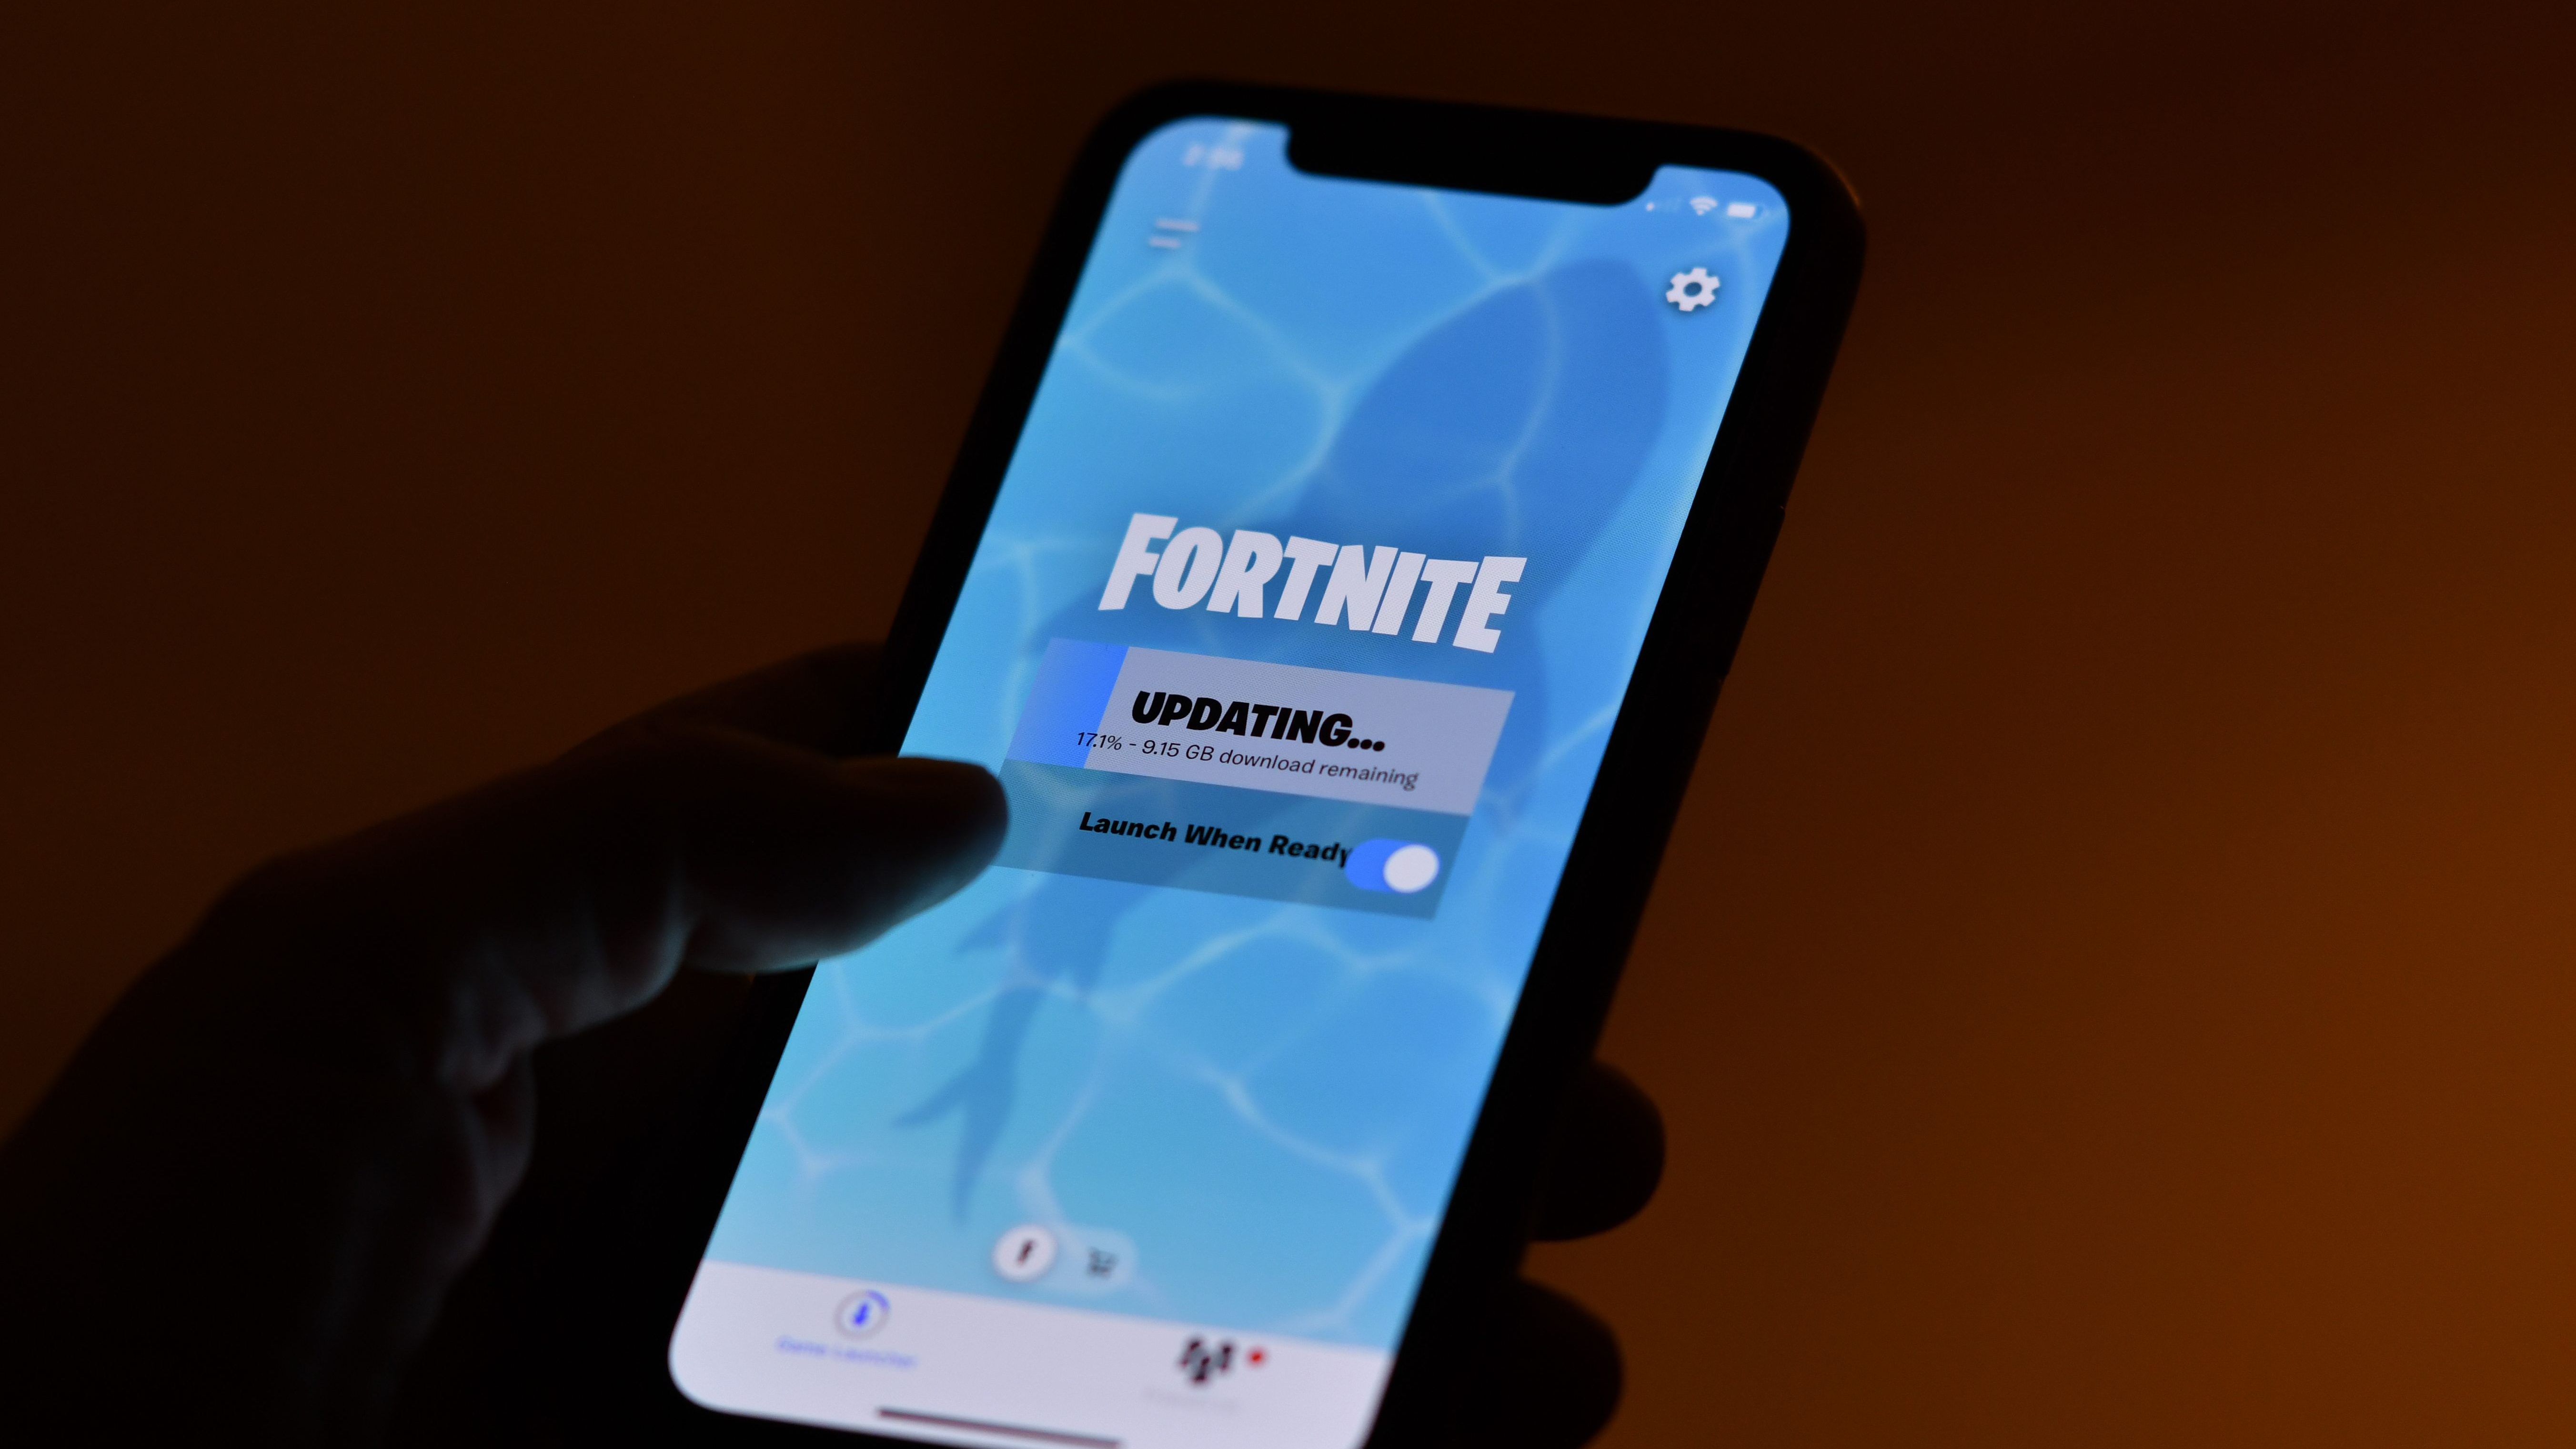 Fortnite on an iPhone X is an exciting look at the future of mobile gaming  - The Verge